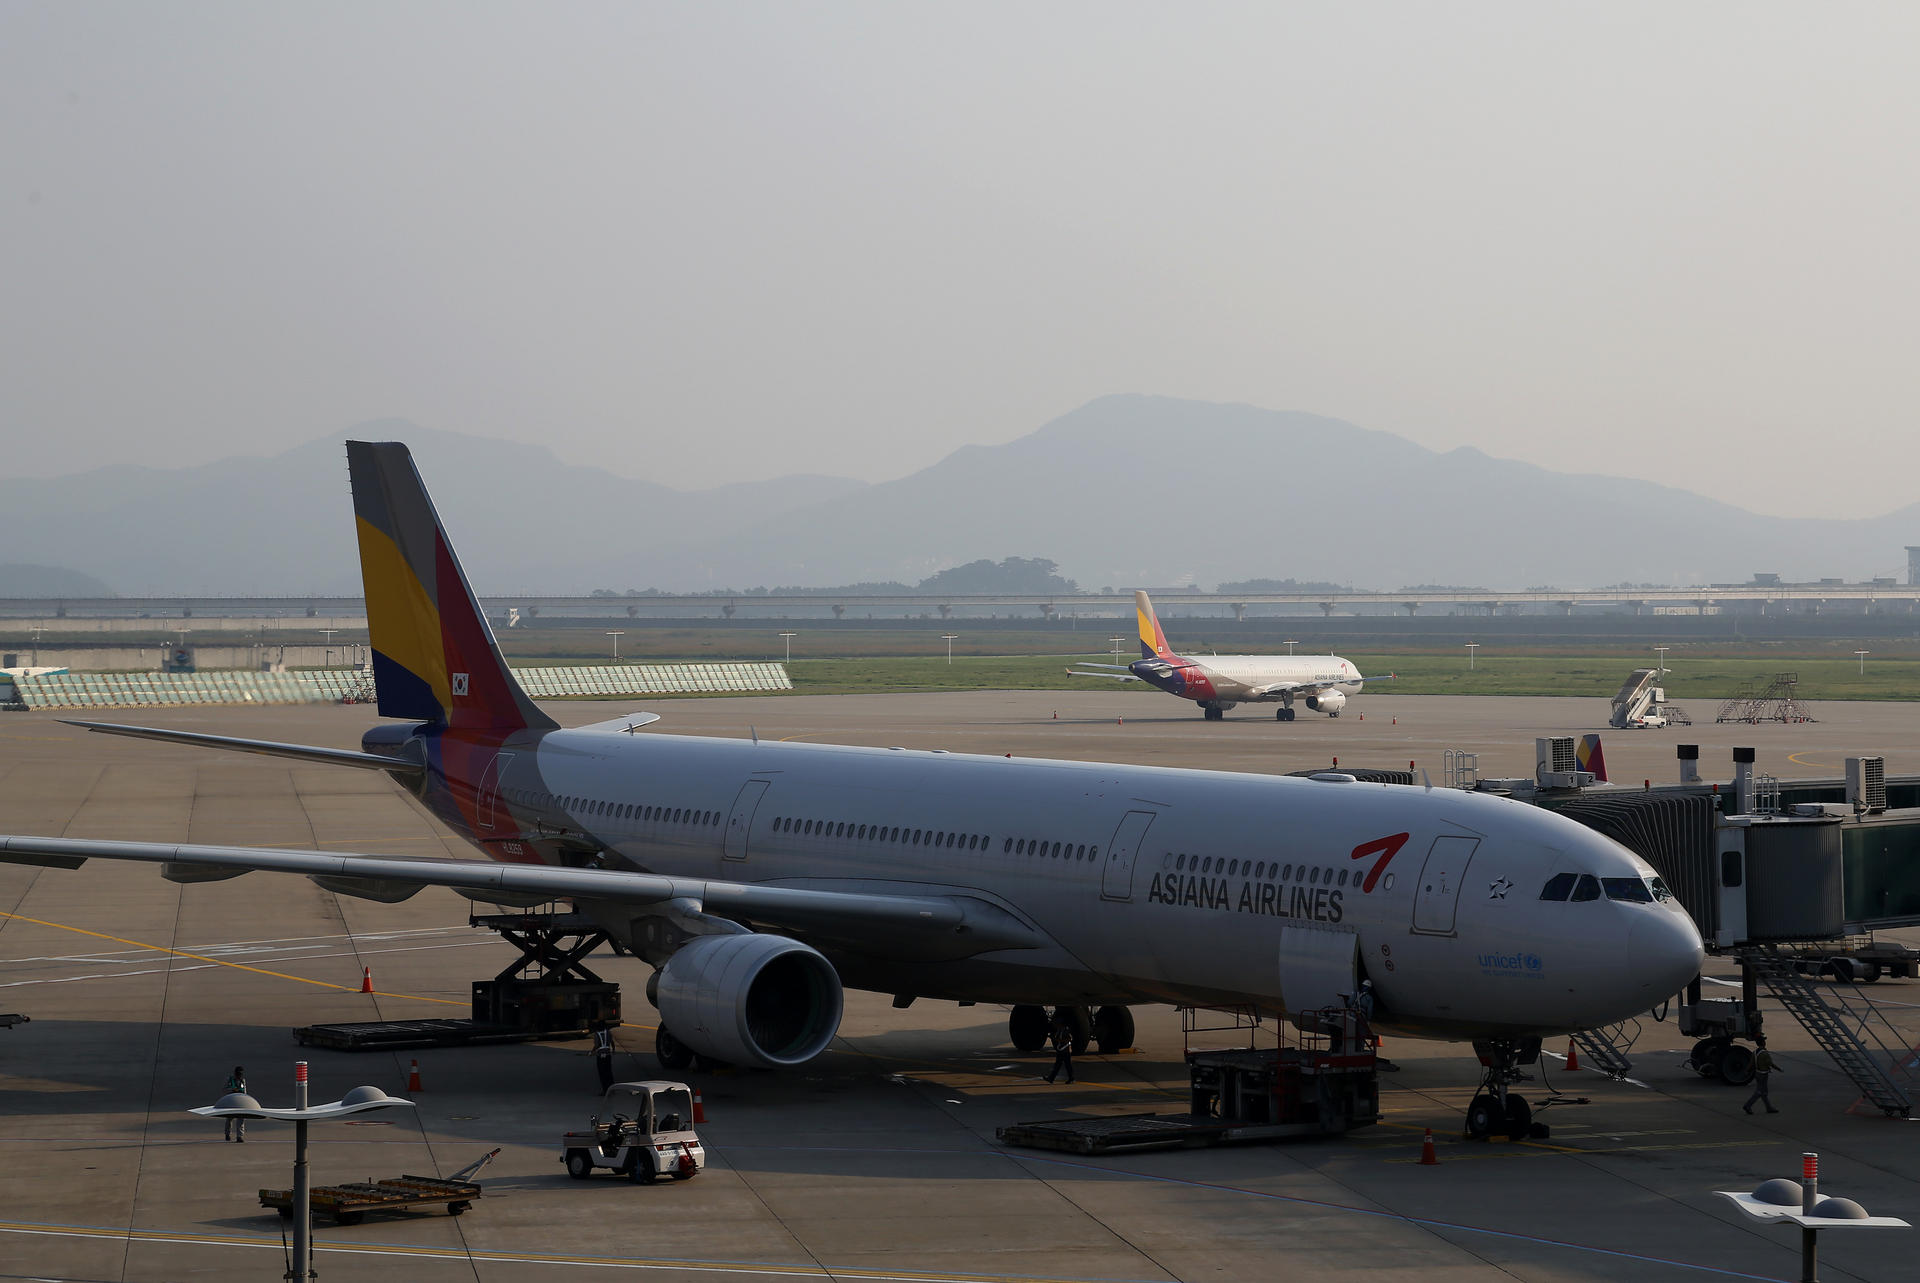 Asiana has been expanding in recent years by adding more planes to its fleet and increasing flights around the world. Photo: Bloomberg